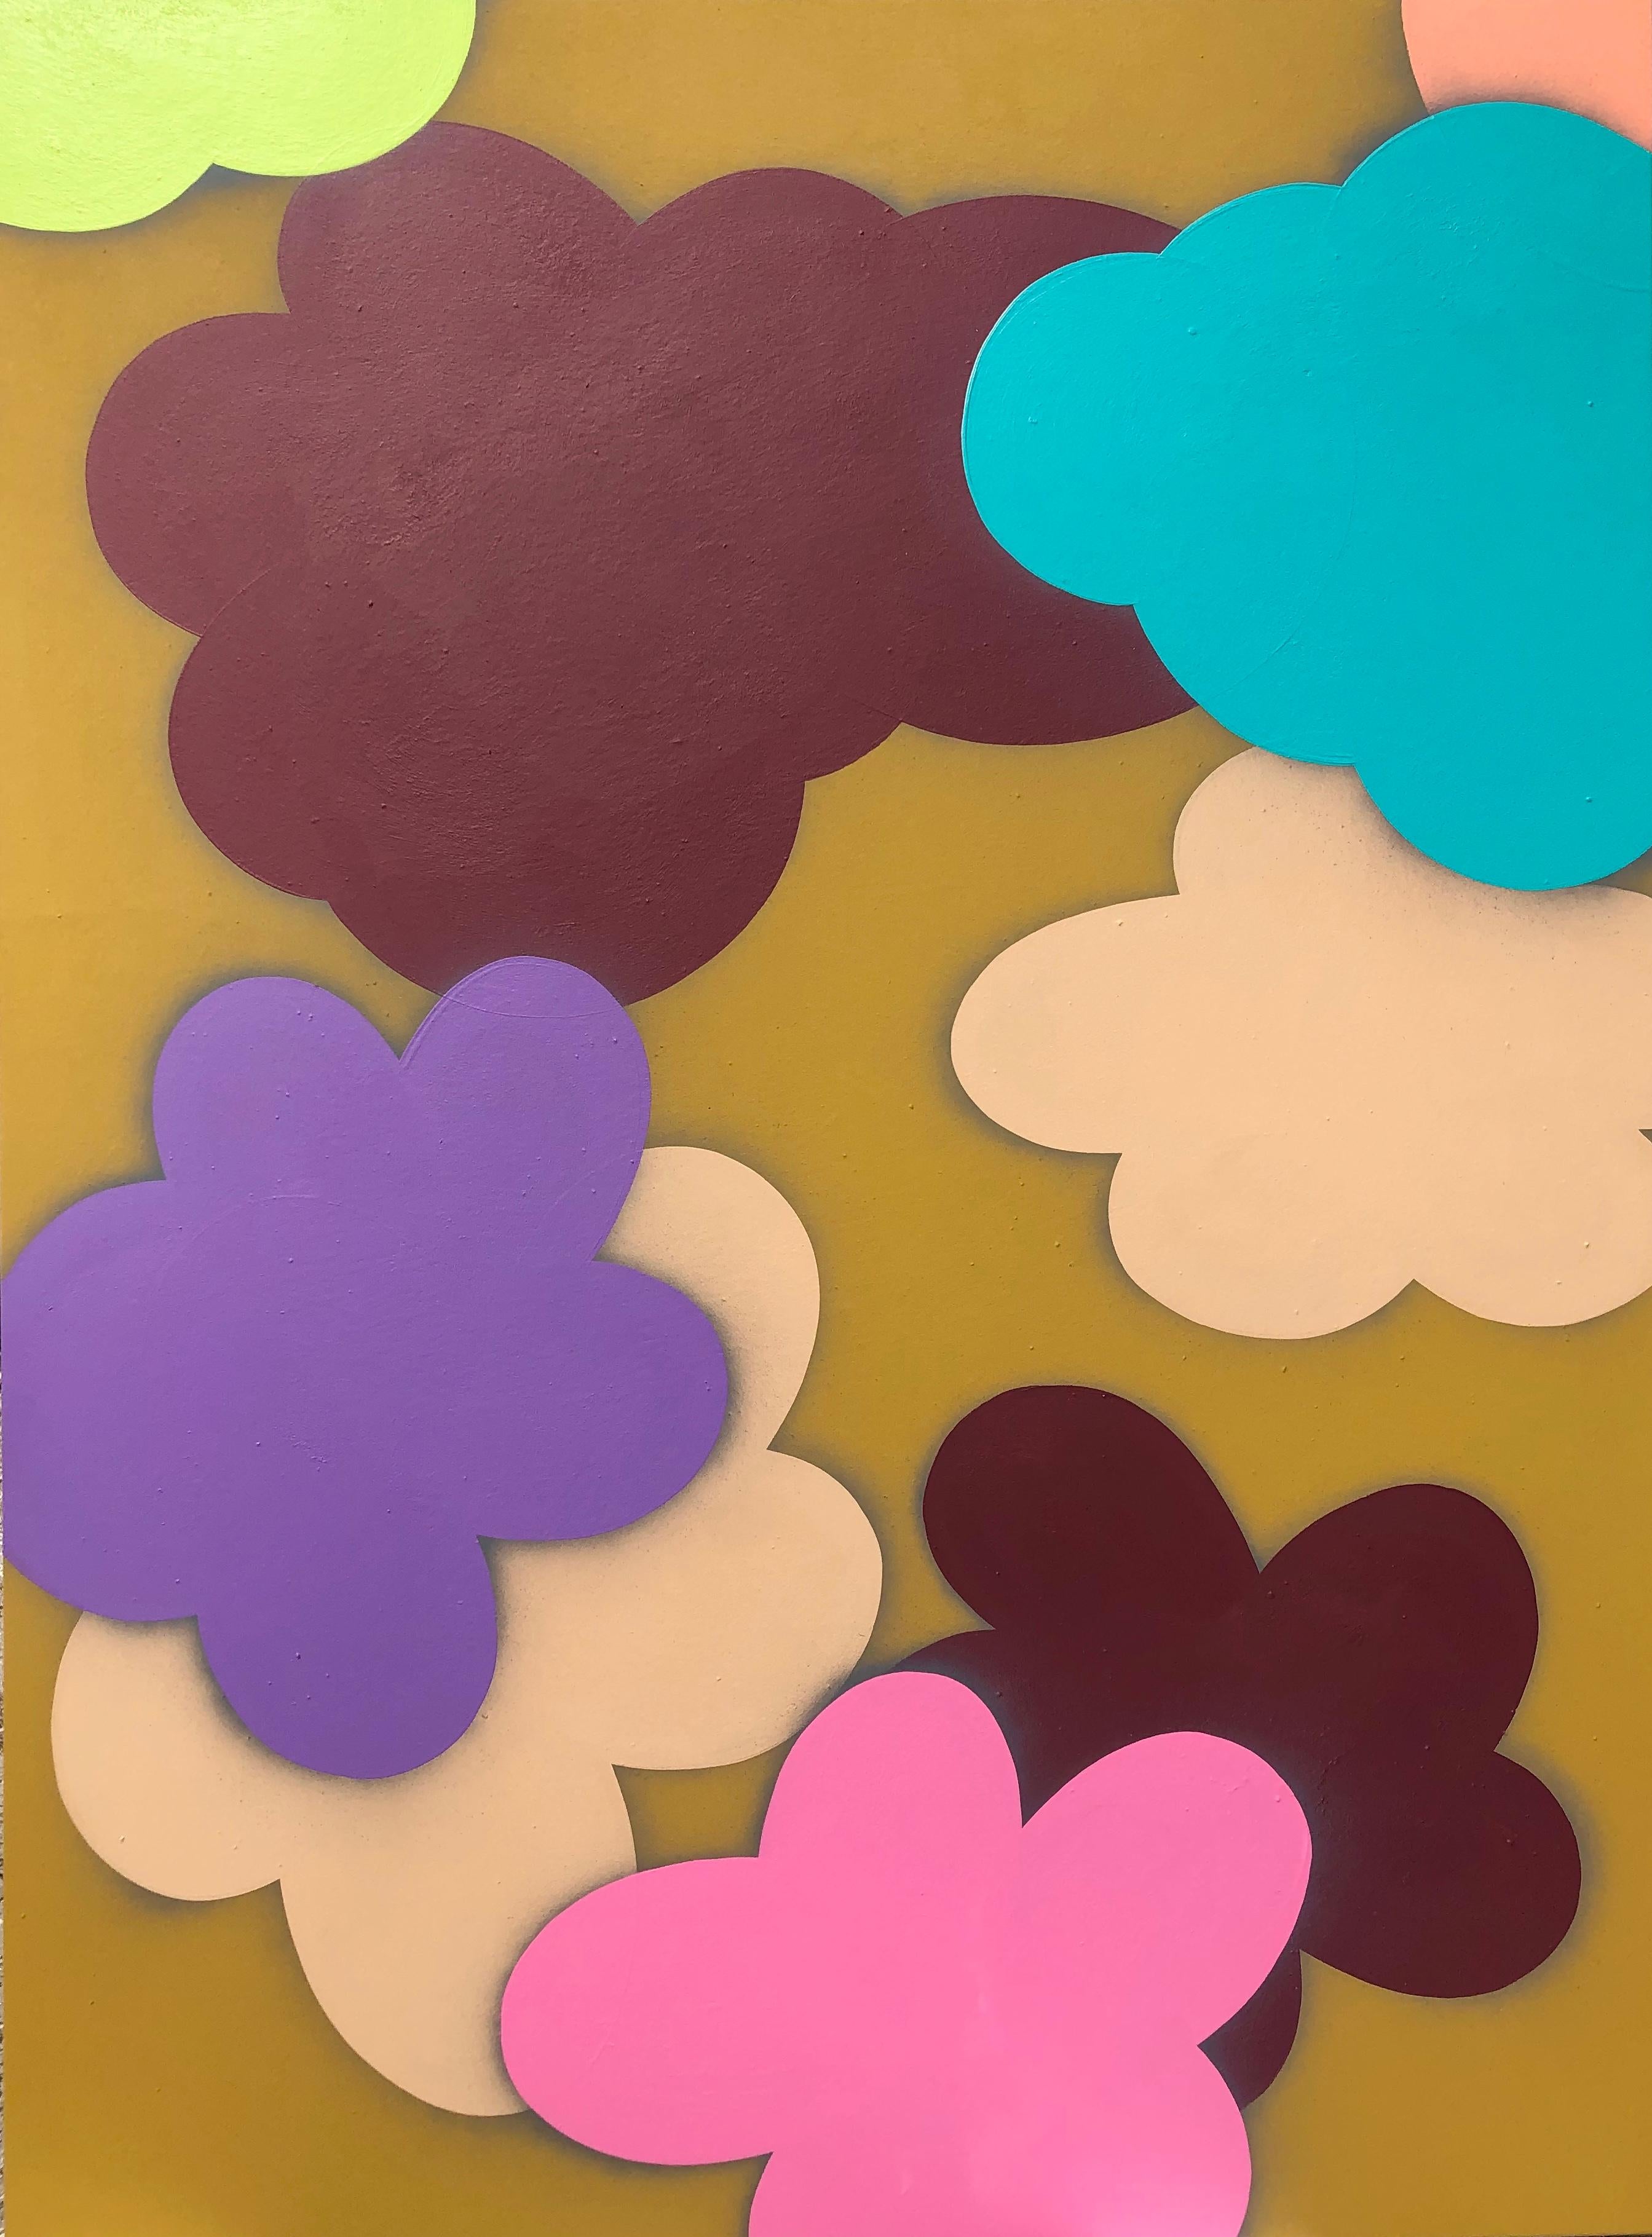 William Finlayson Abstract Painting - Original Painting on Panel Titled: "Cloudy with a Chance of Flowers I"